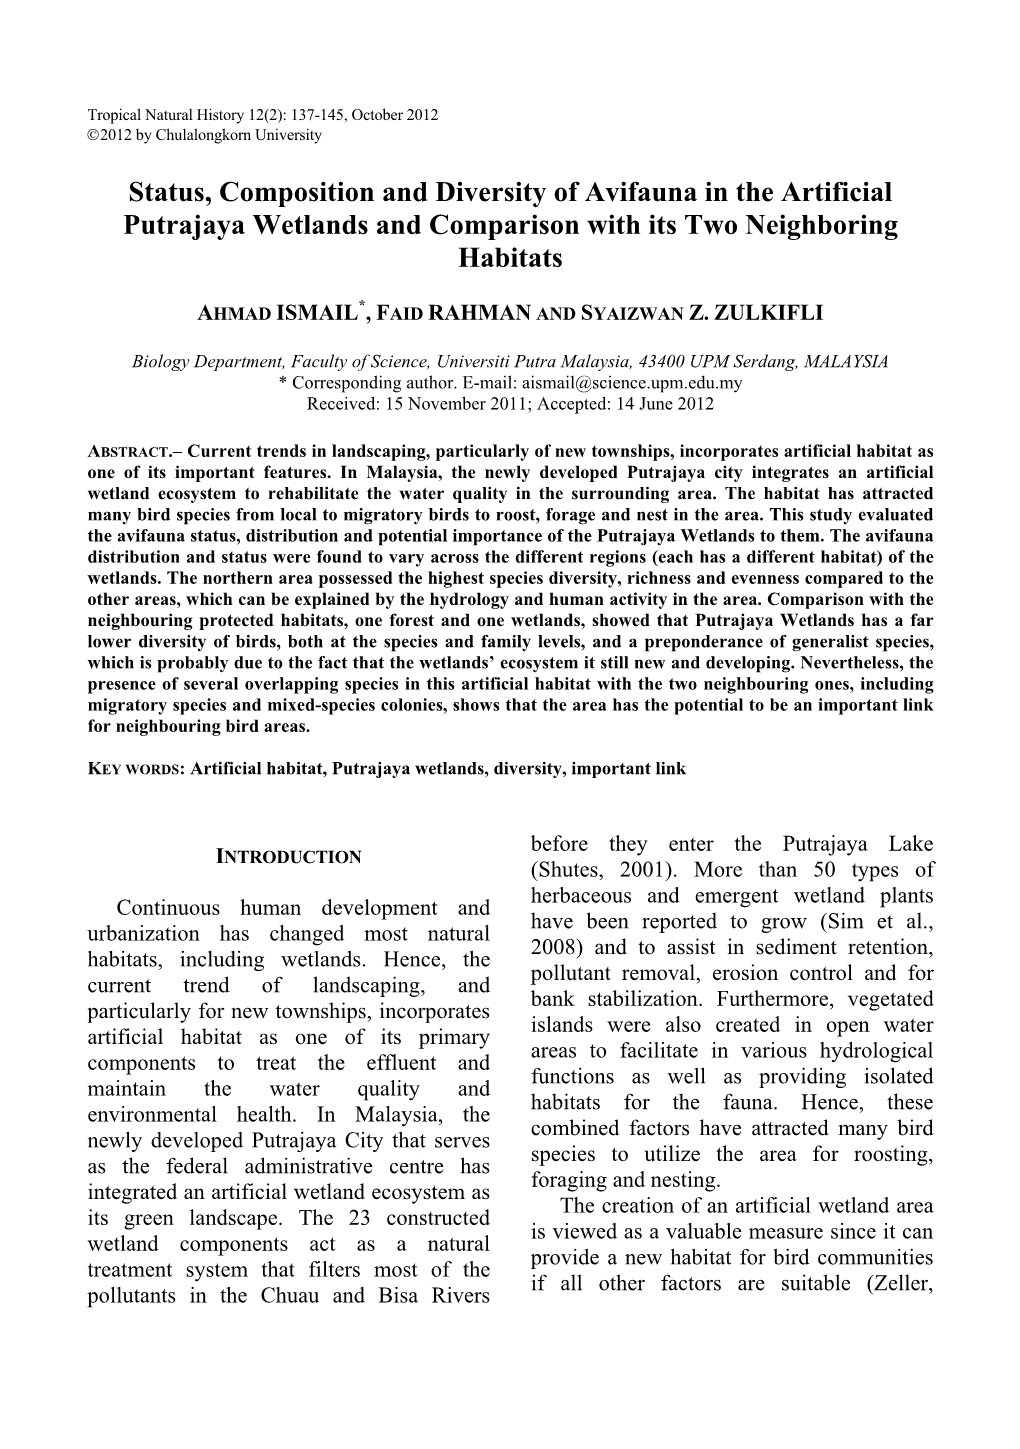 Status, Composition and Diversity of Avifauna in the Artificial Putrajaya Wetlands and Comparison with Its Two Neighboring Habitats